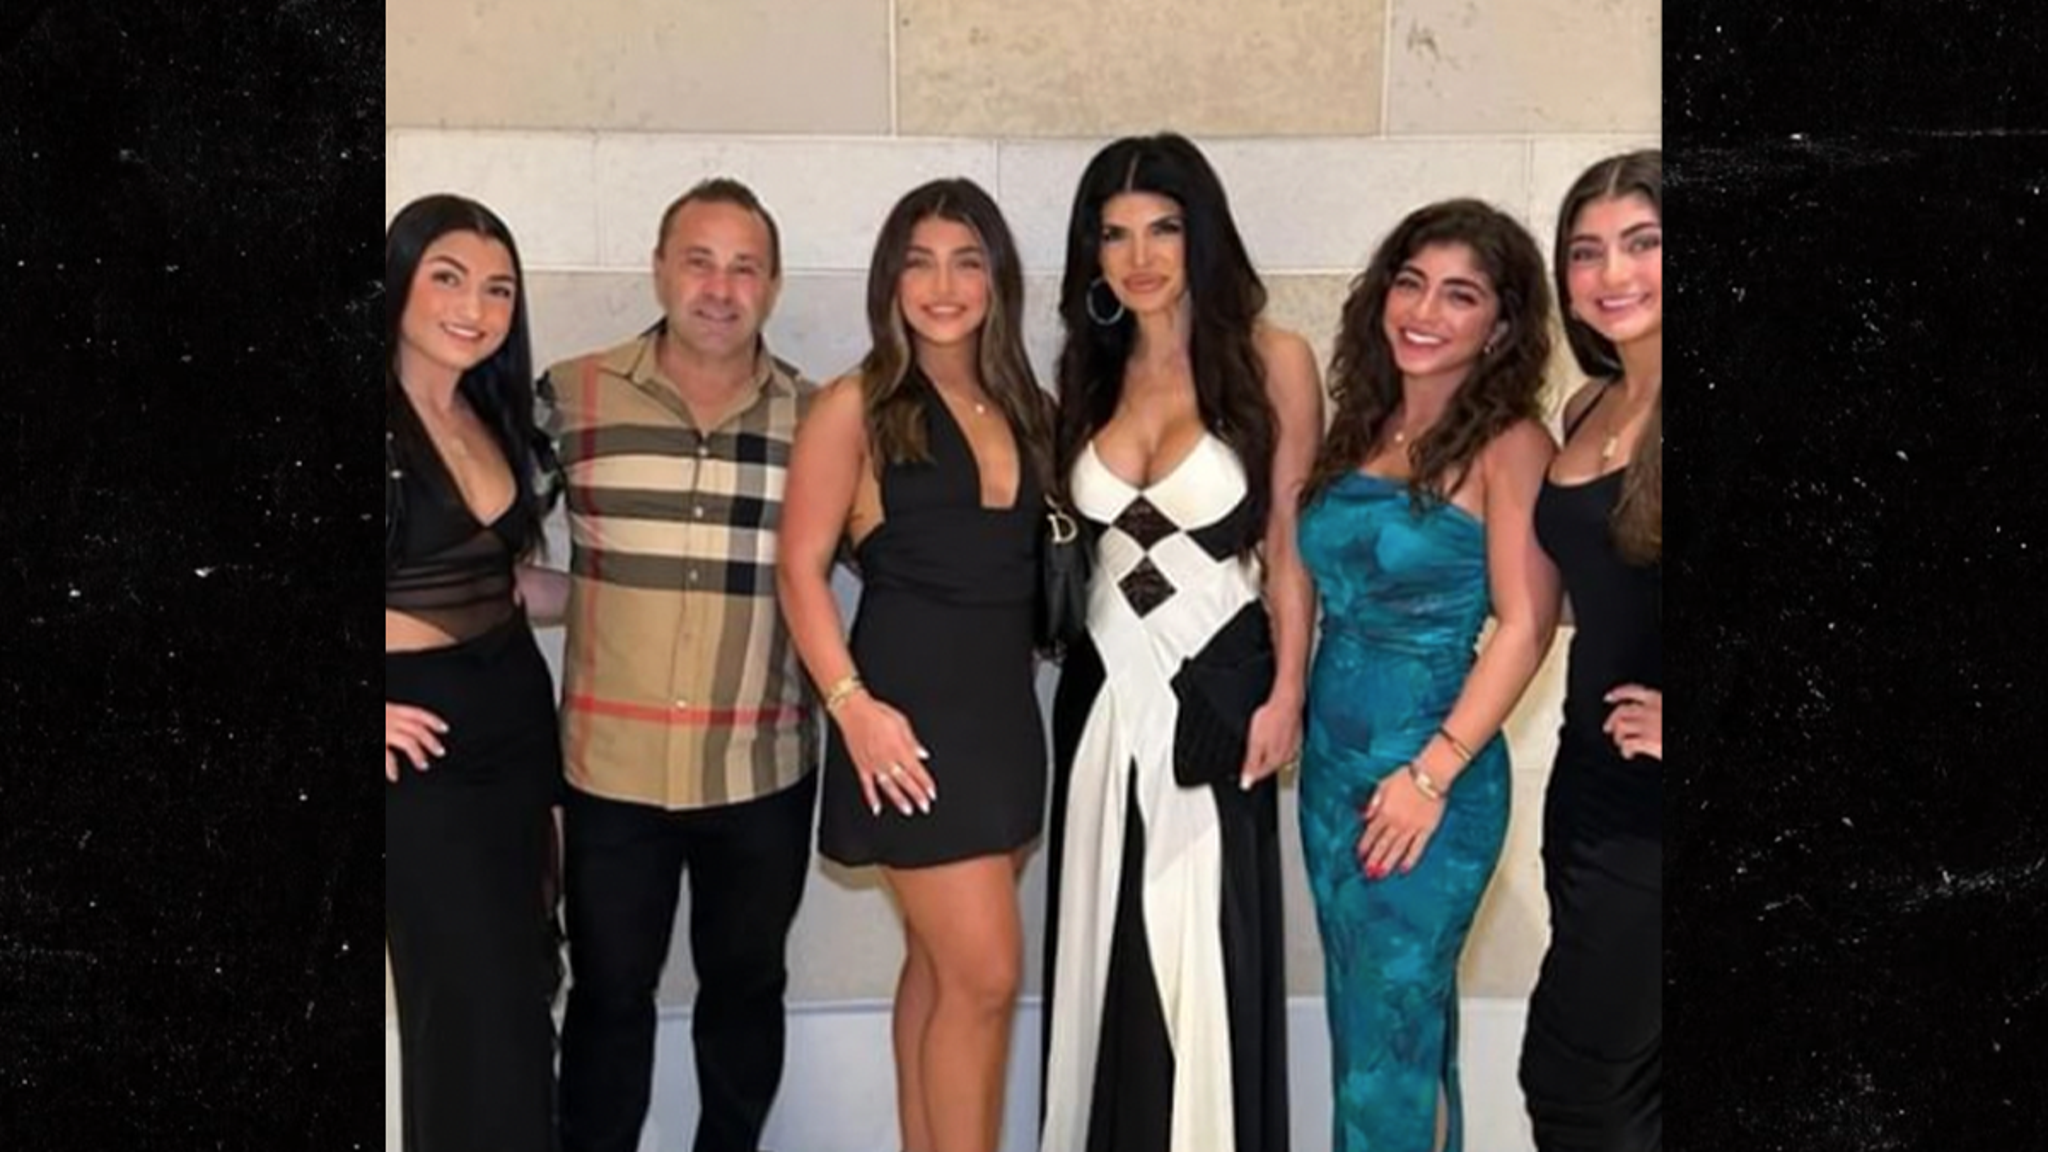 Joe Giudice spends New Year with his ex Teresa and his daughters in the Bahamas